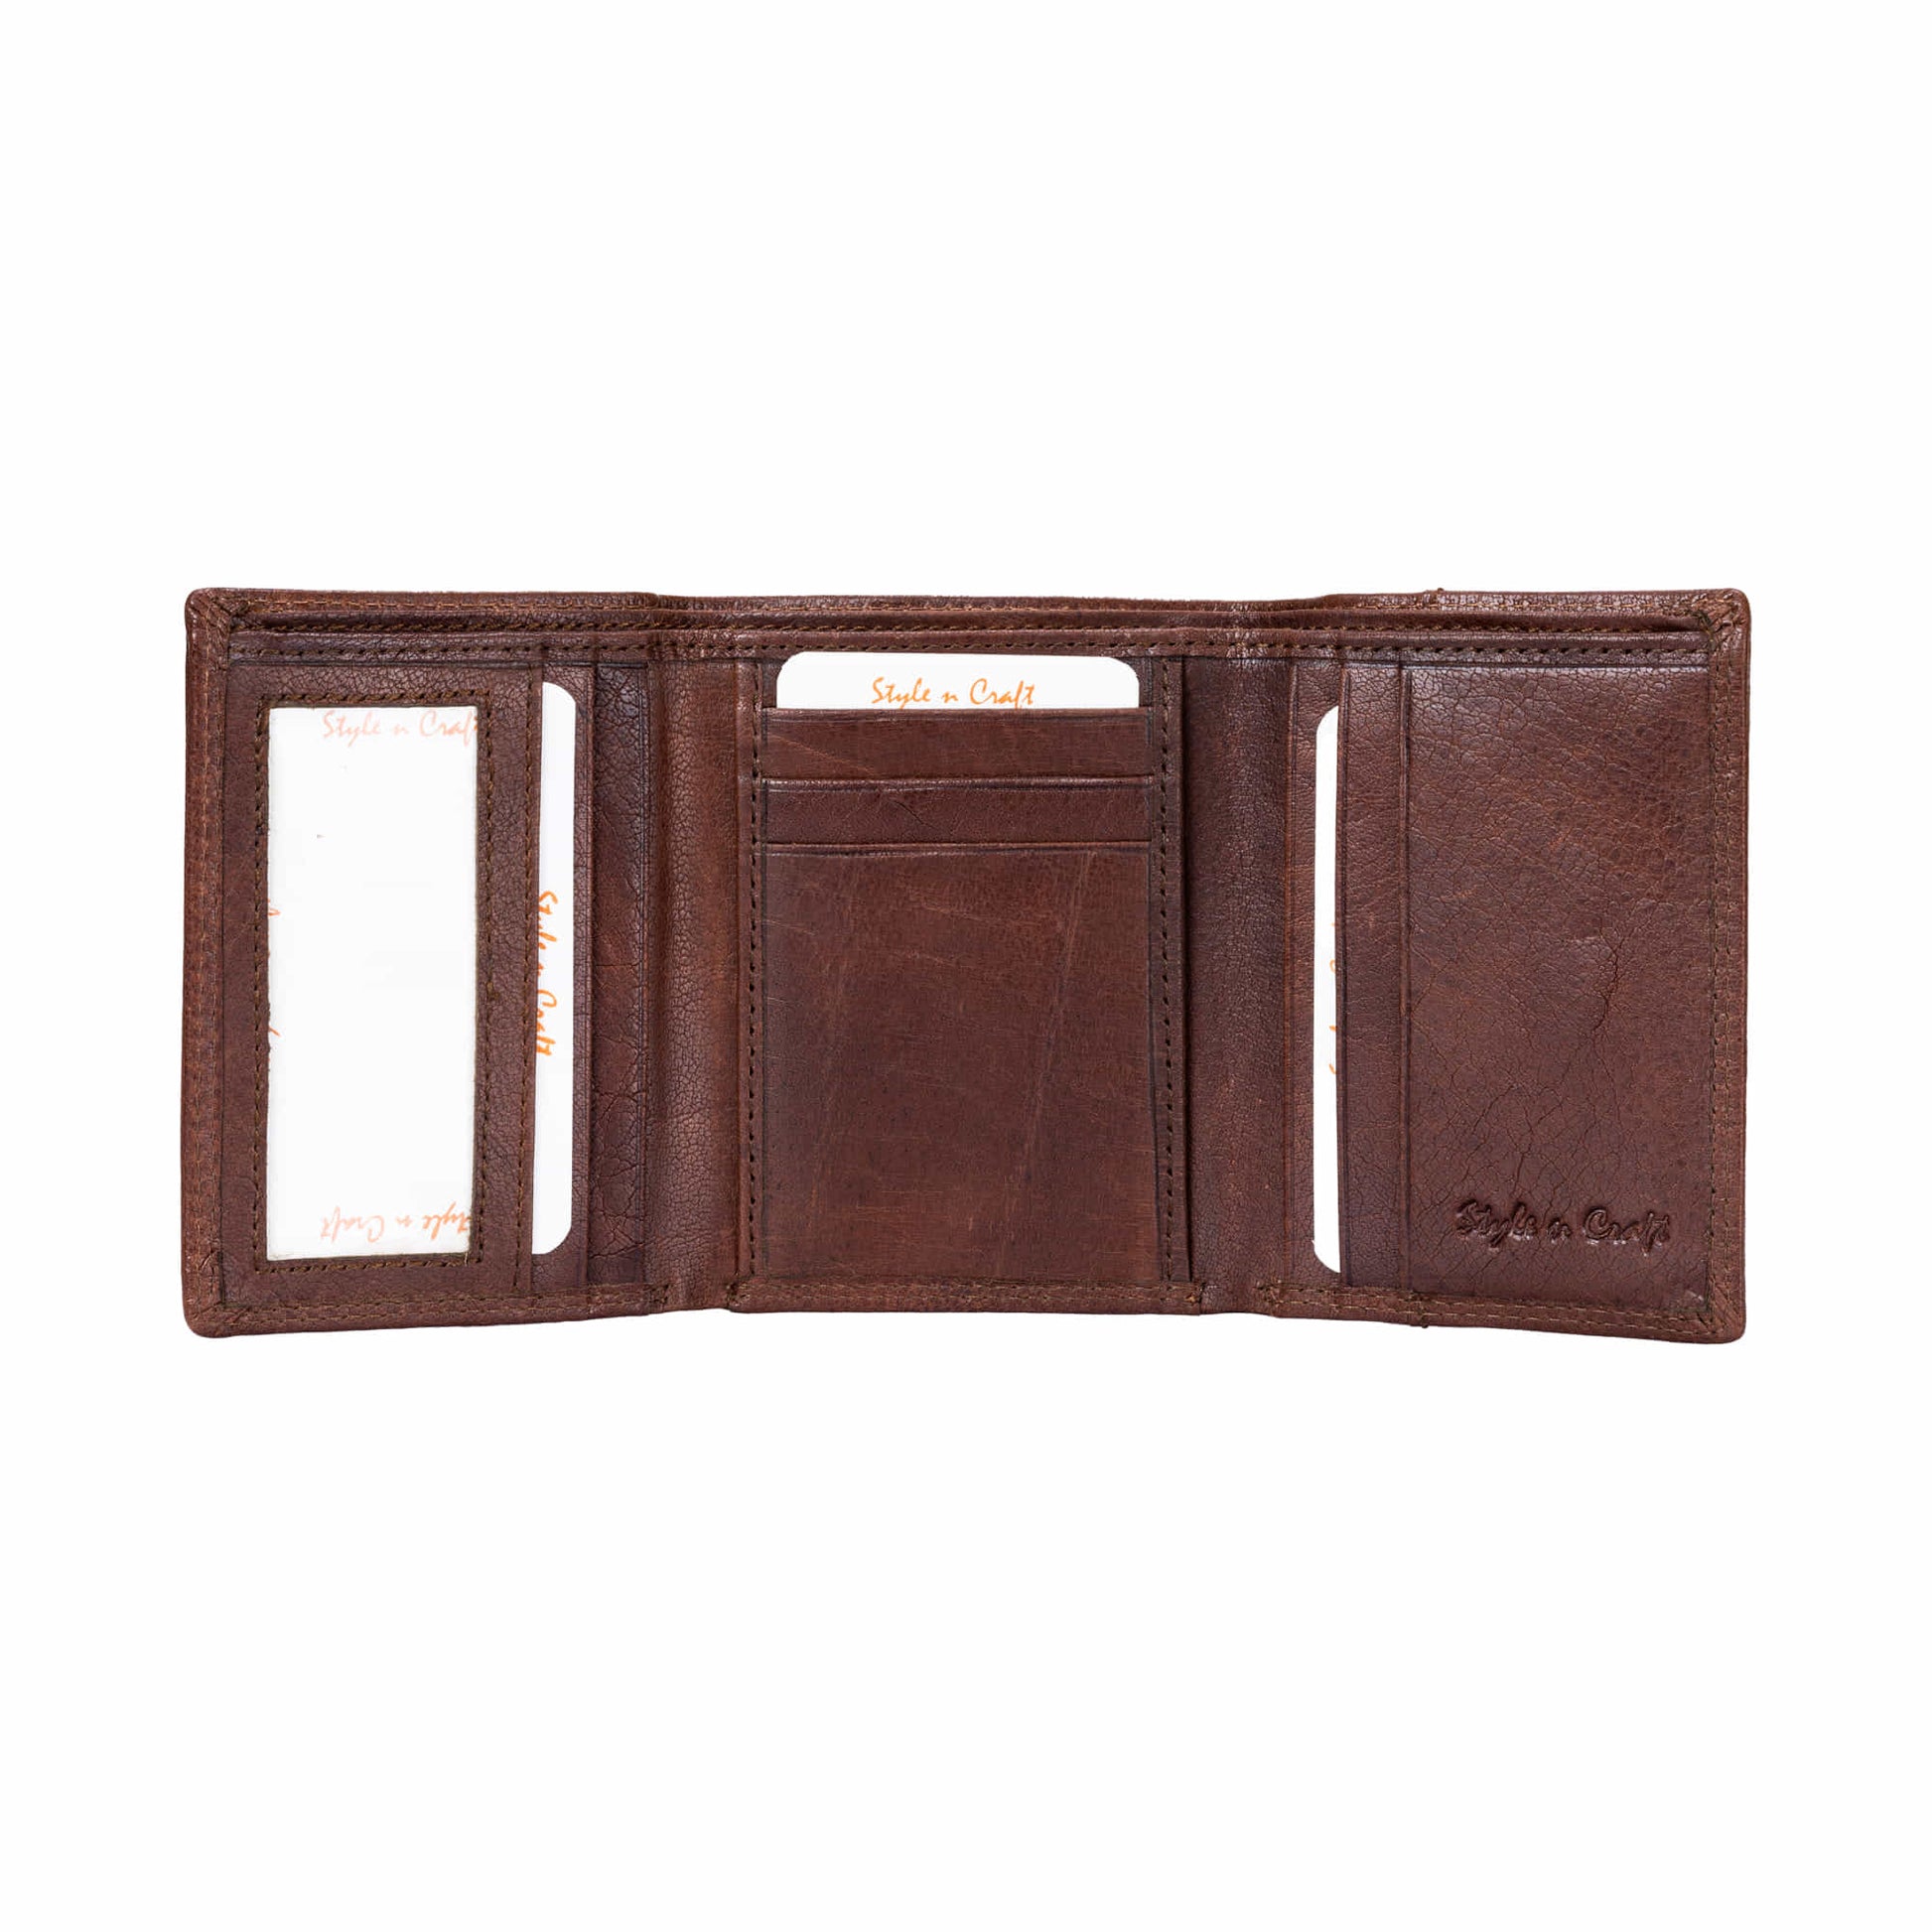 Real Leather Slim Wallets For Men Trifold Mens India